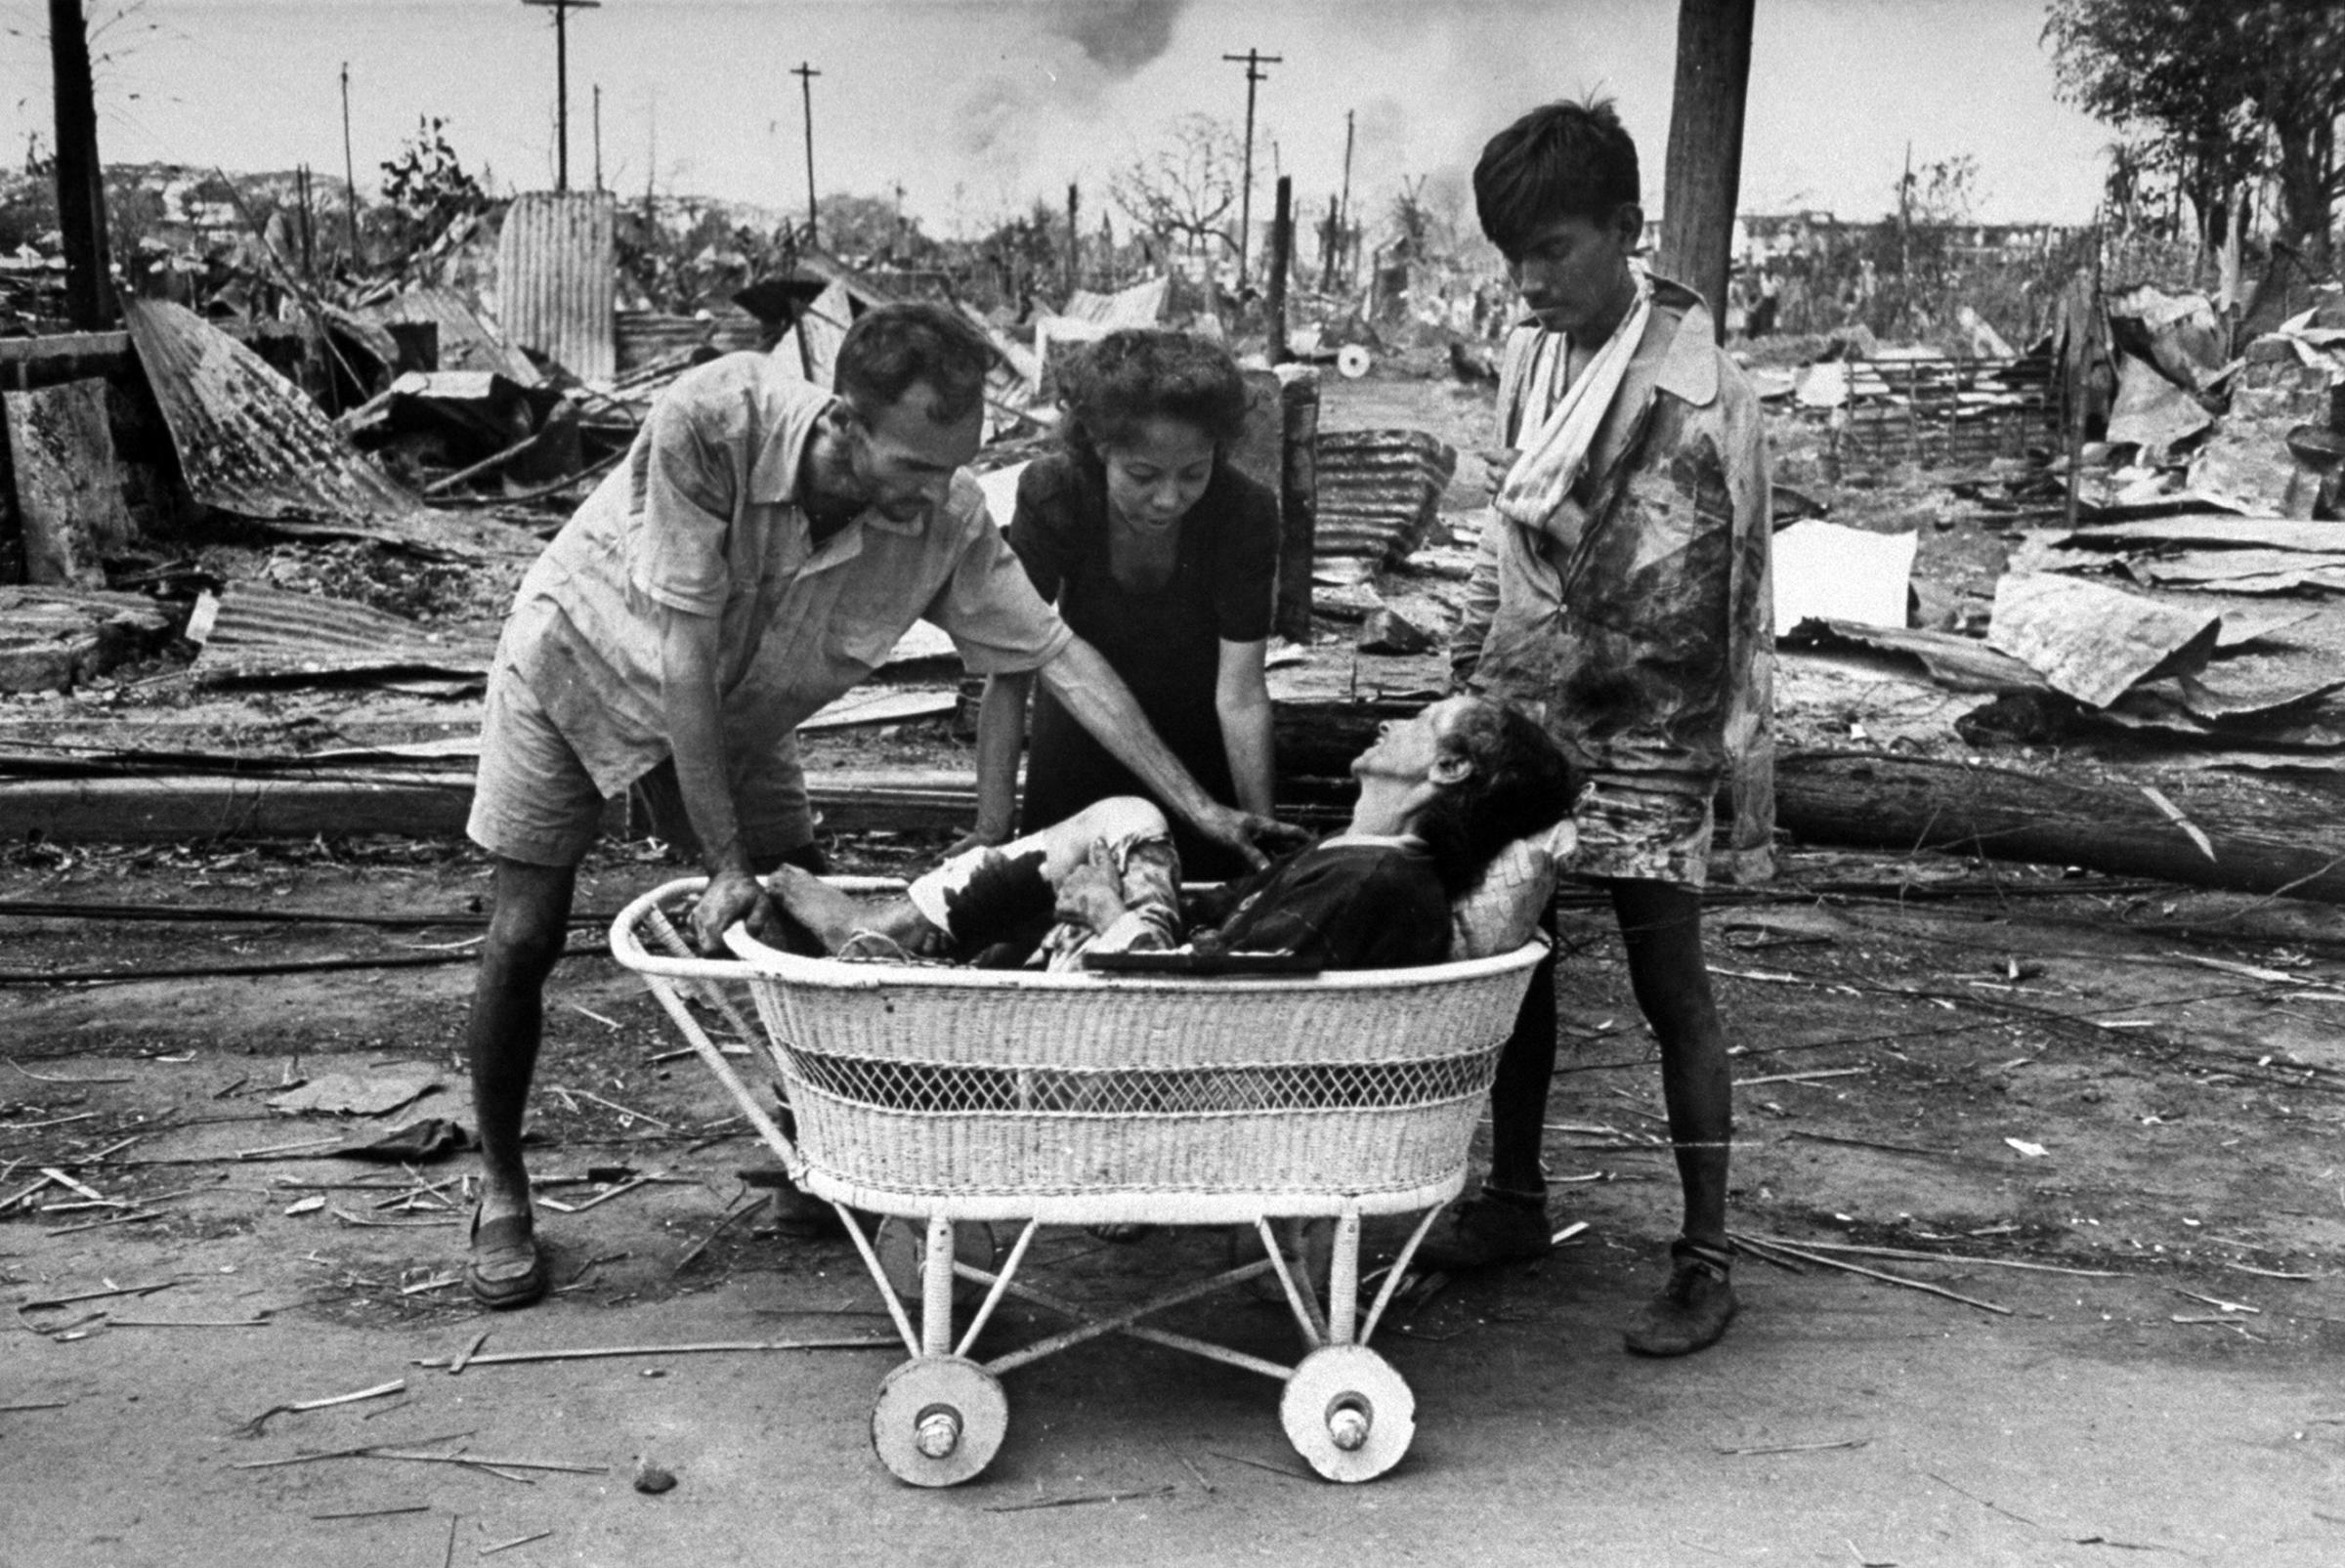 Friends using a baby carriage to transport a wounded woman to an aid station during the fight to reclaim the city from occupying Japanese troops. This image is an outtake from the March 5, 1945 photo essay: Santo Tomas is Delivered.